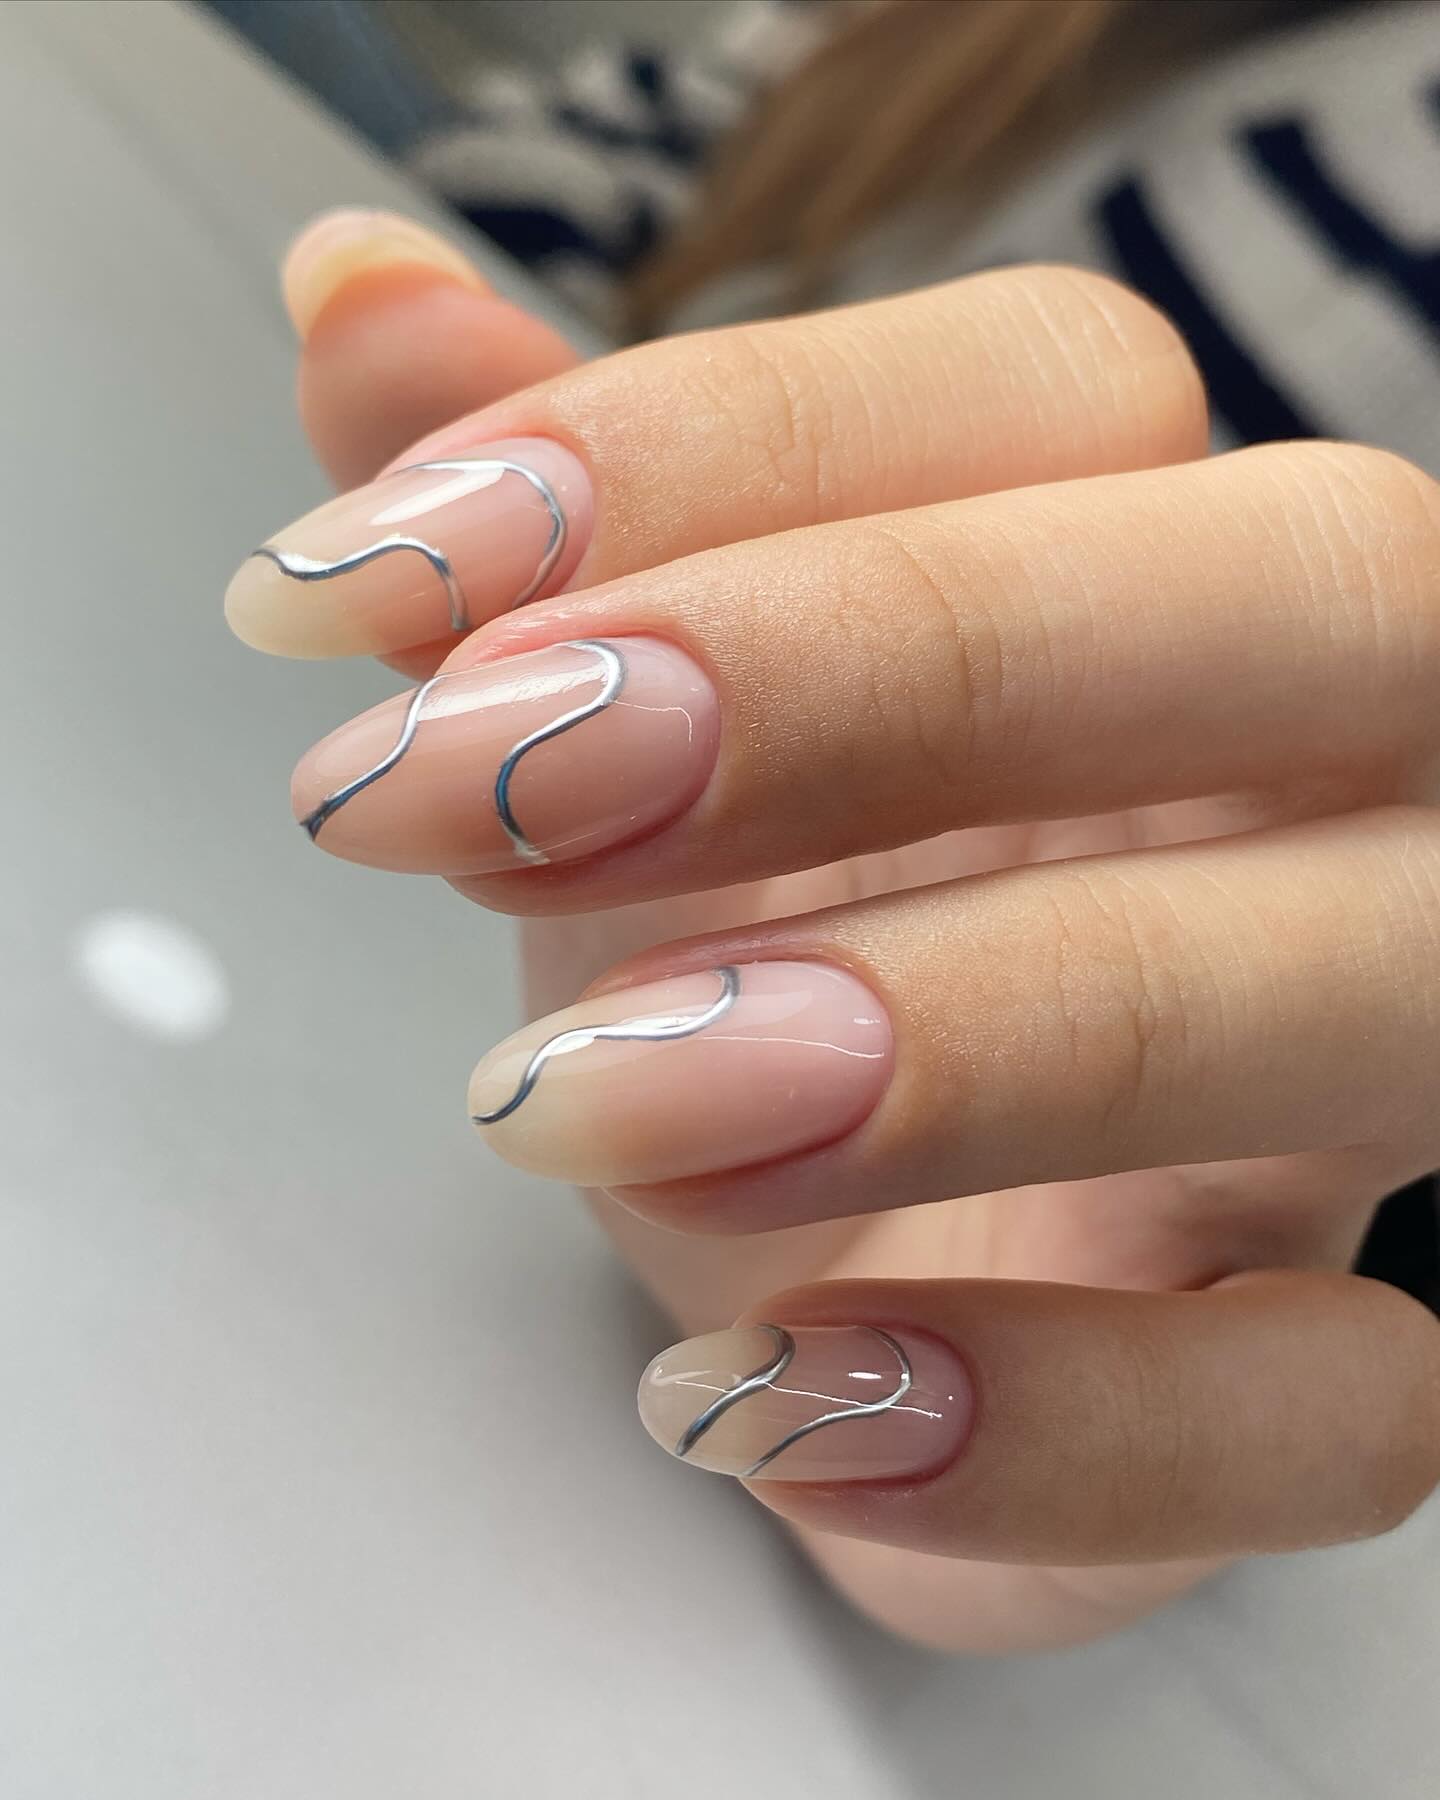 100+ Short Nail Designs You’ll Want To Try This Year images 89